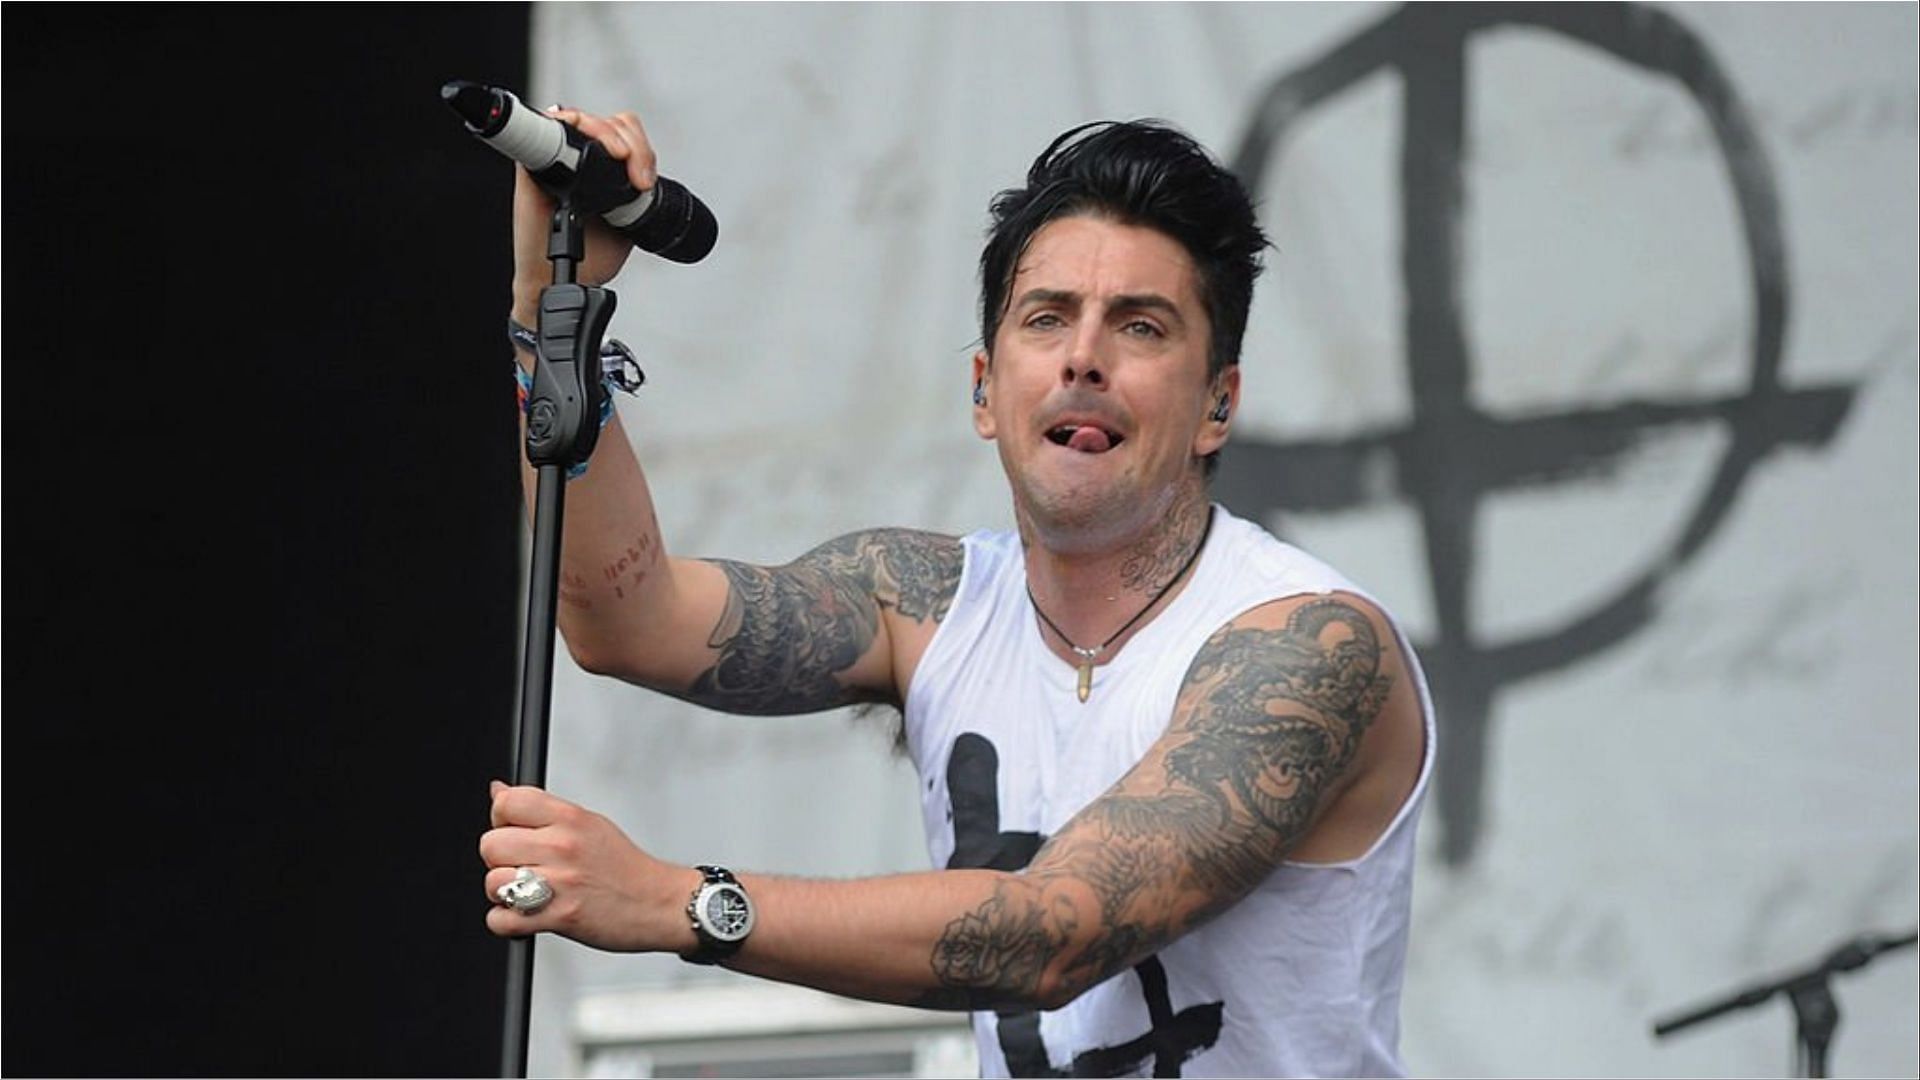 Ian Watkins has been stabbed inside the prison by a few inmates (Image via Pier Marco Tacca/Getty Images)